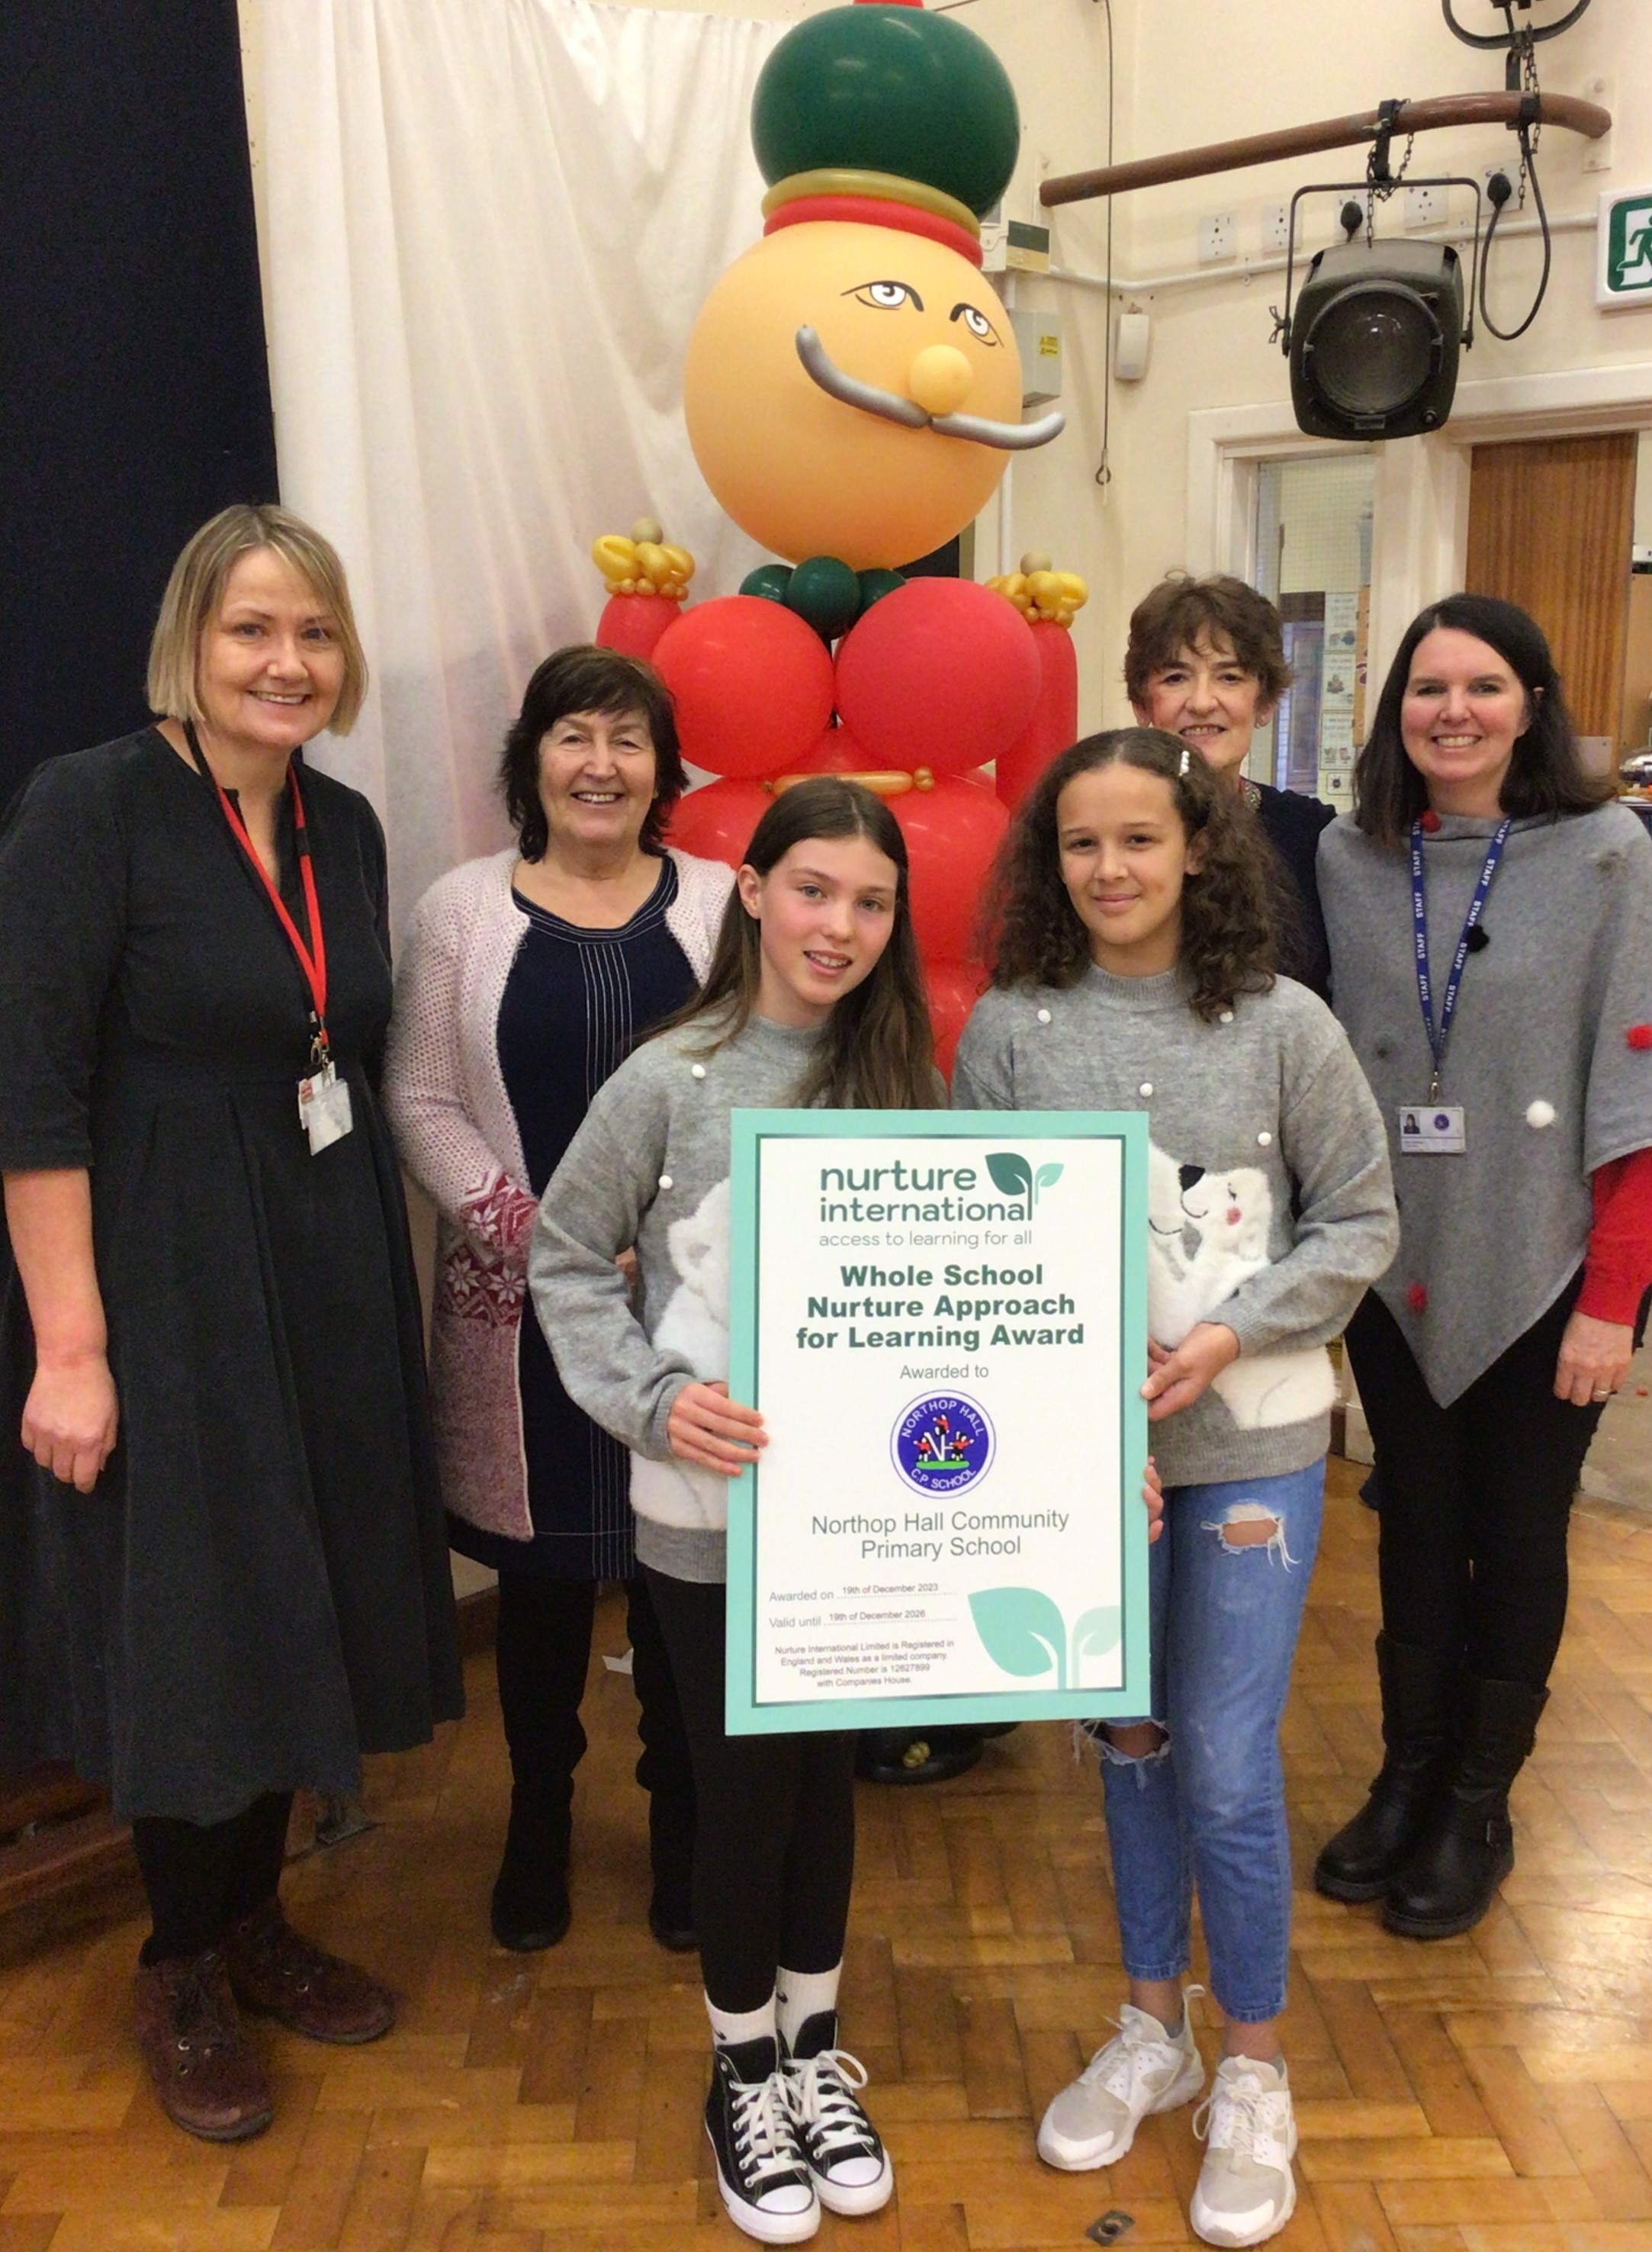 Linda Callaghan (local authority), Yvonne Monaghan and Alison Grimshaw (Nurture International) and Lynne Harrison (headteacher) with Year 6 pupils, receiving the certificate.